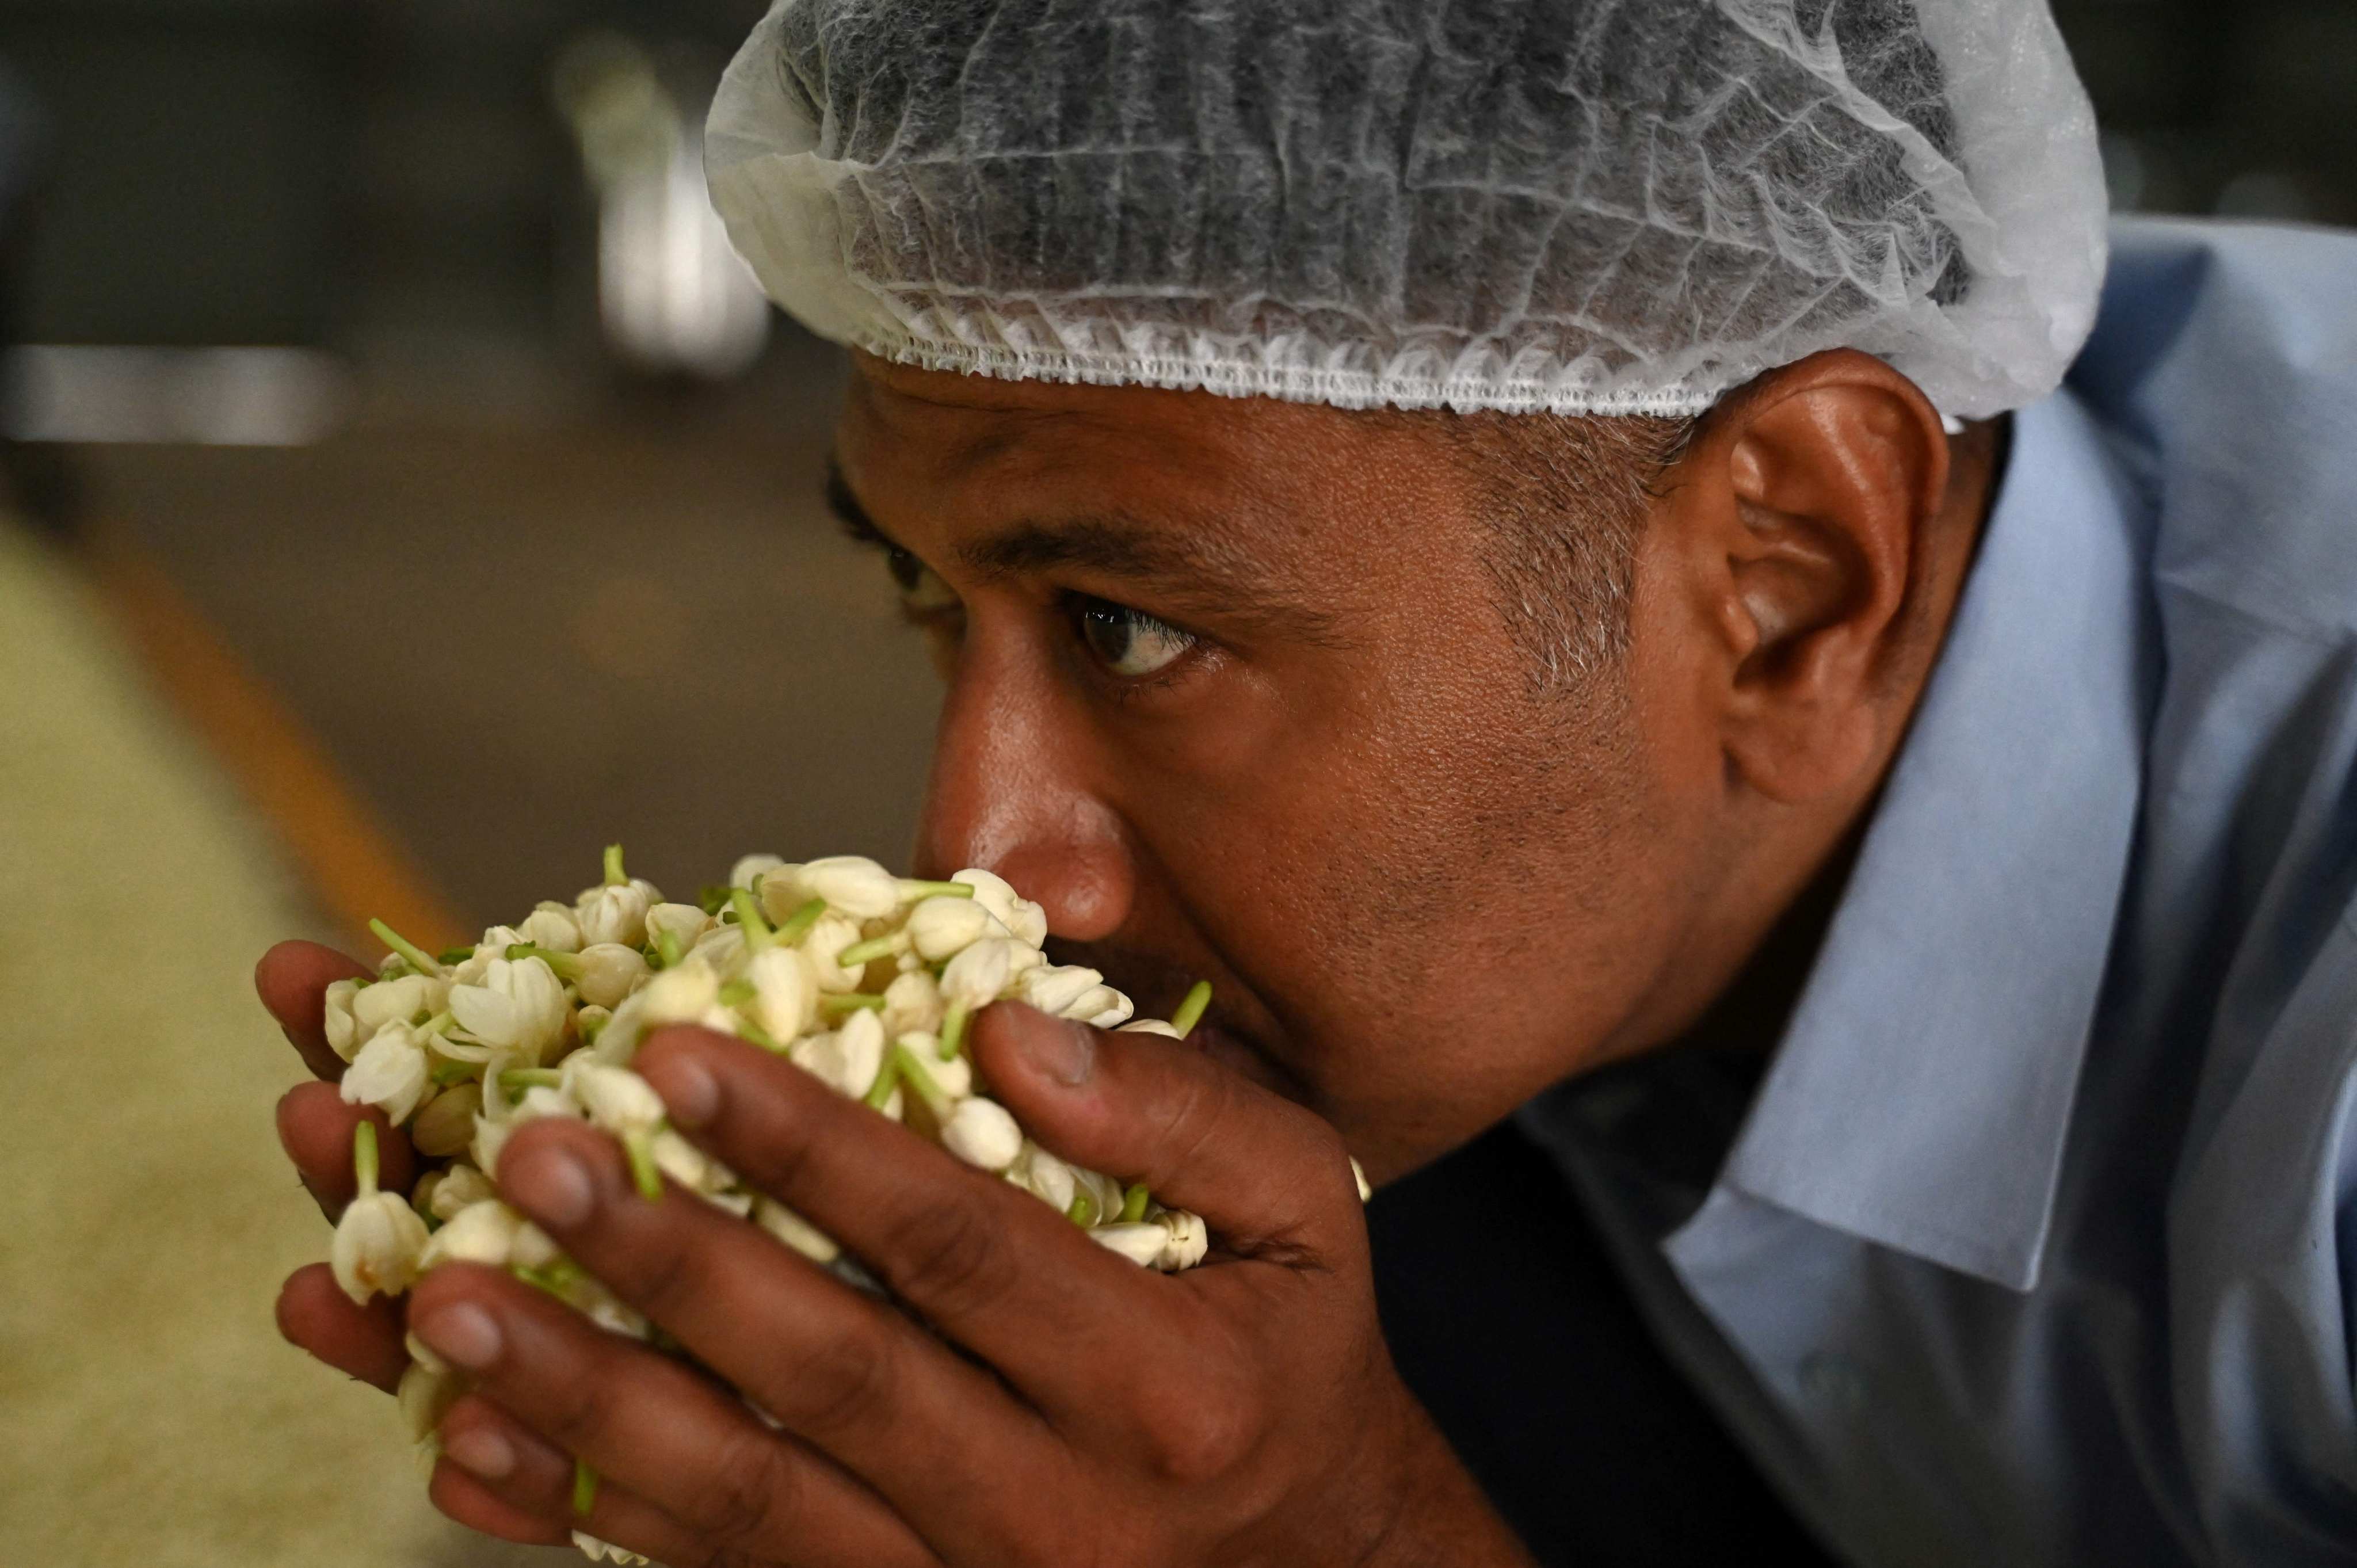 Raja Palaniswamy, a director at Jasmine Concrete, smells jasmine flowers at his factory in Madurai, India, a source of jasmine oil used by some of the world’s top perfumers. Photo: AFP